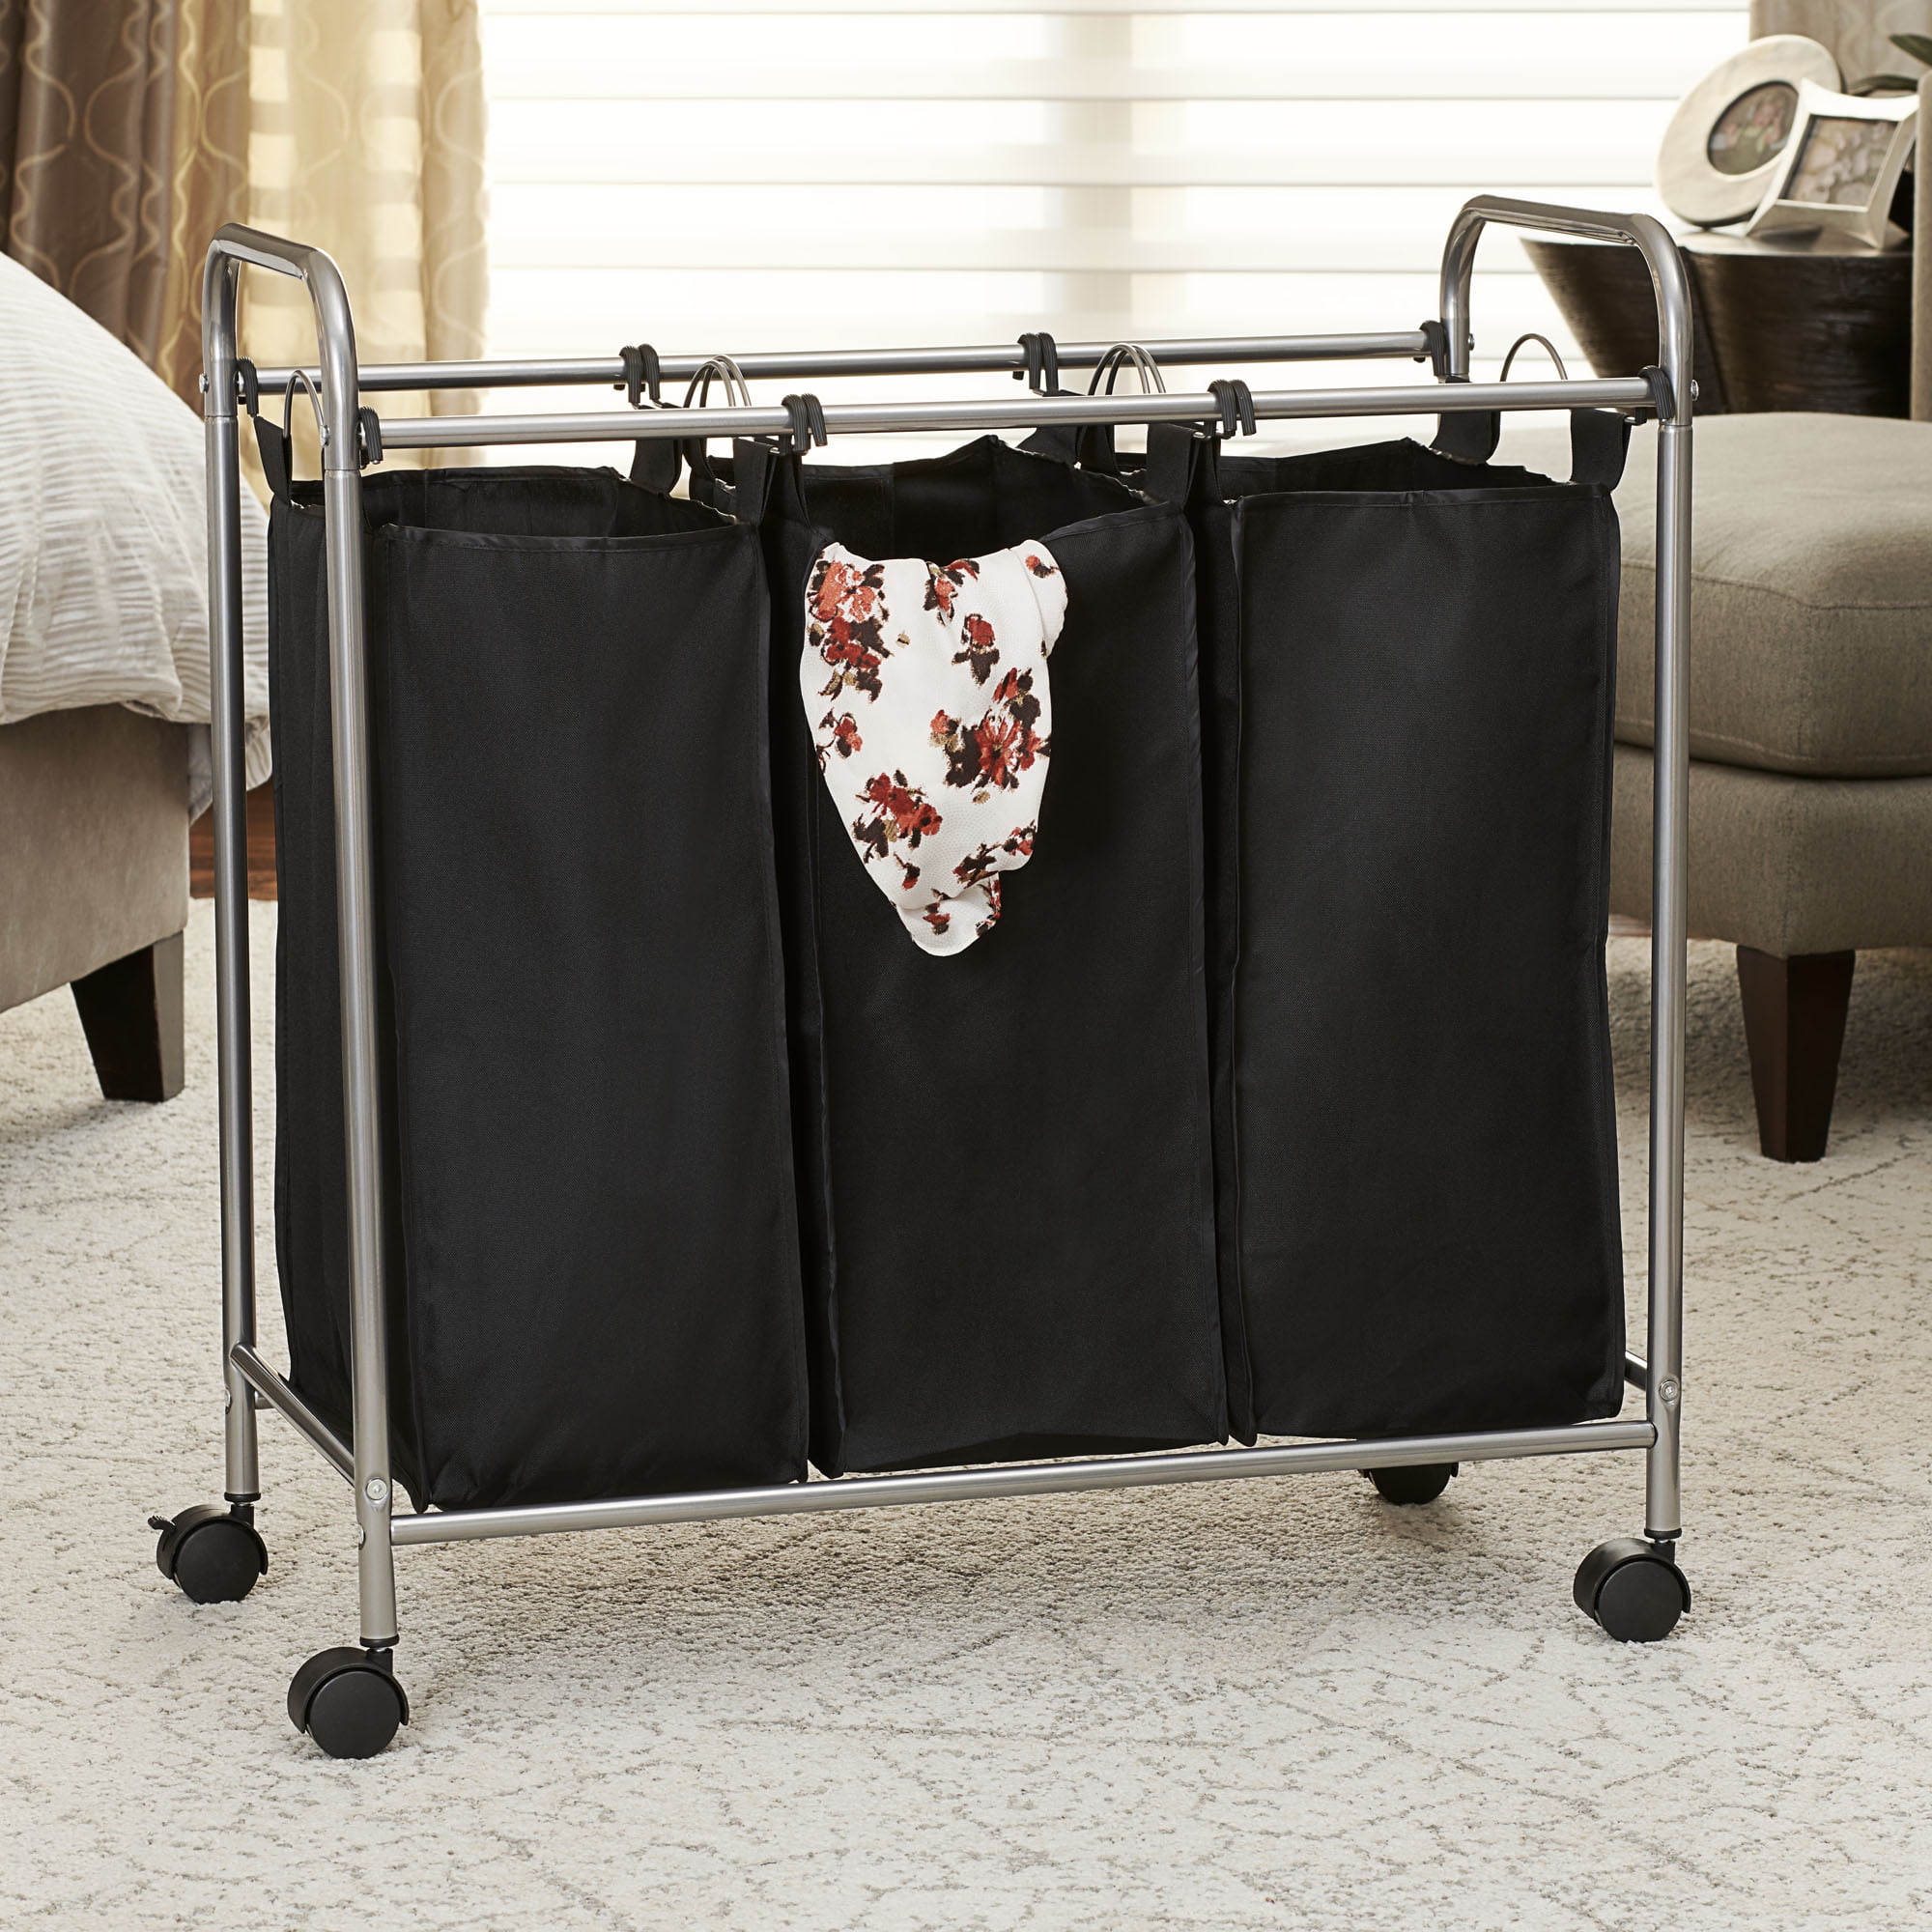 Household Essentials Rolling Triple Sorter Laundry Hamper with 3 Lift-Out B...